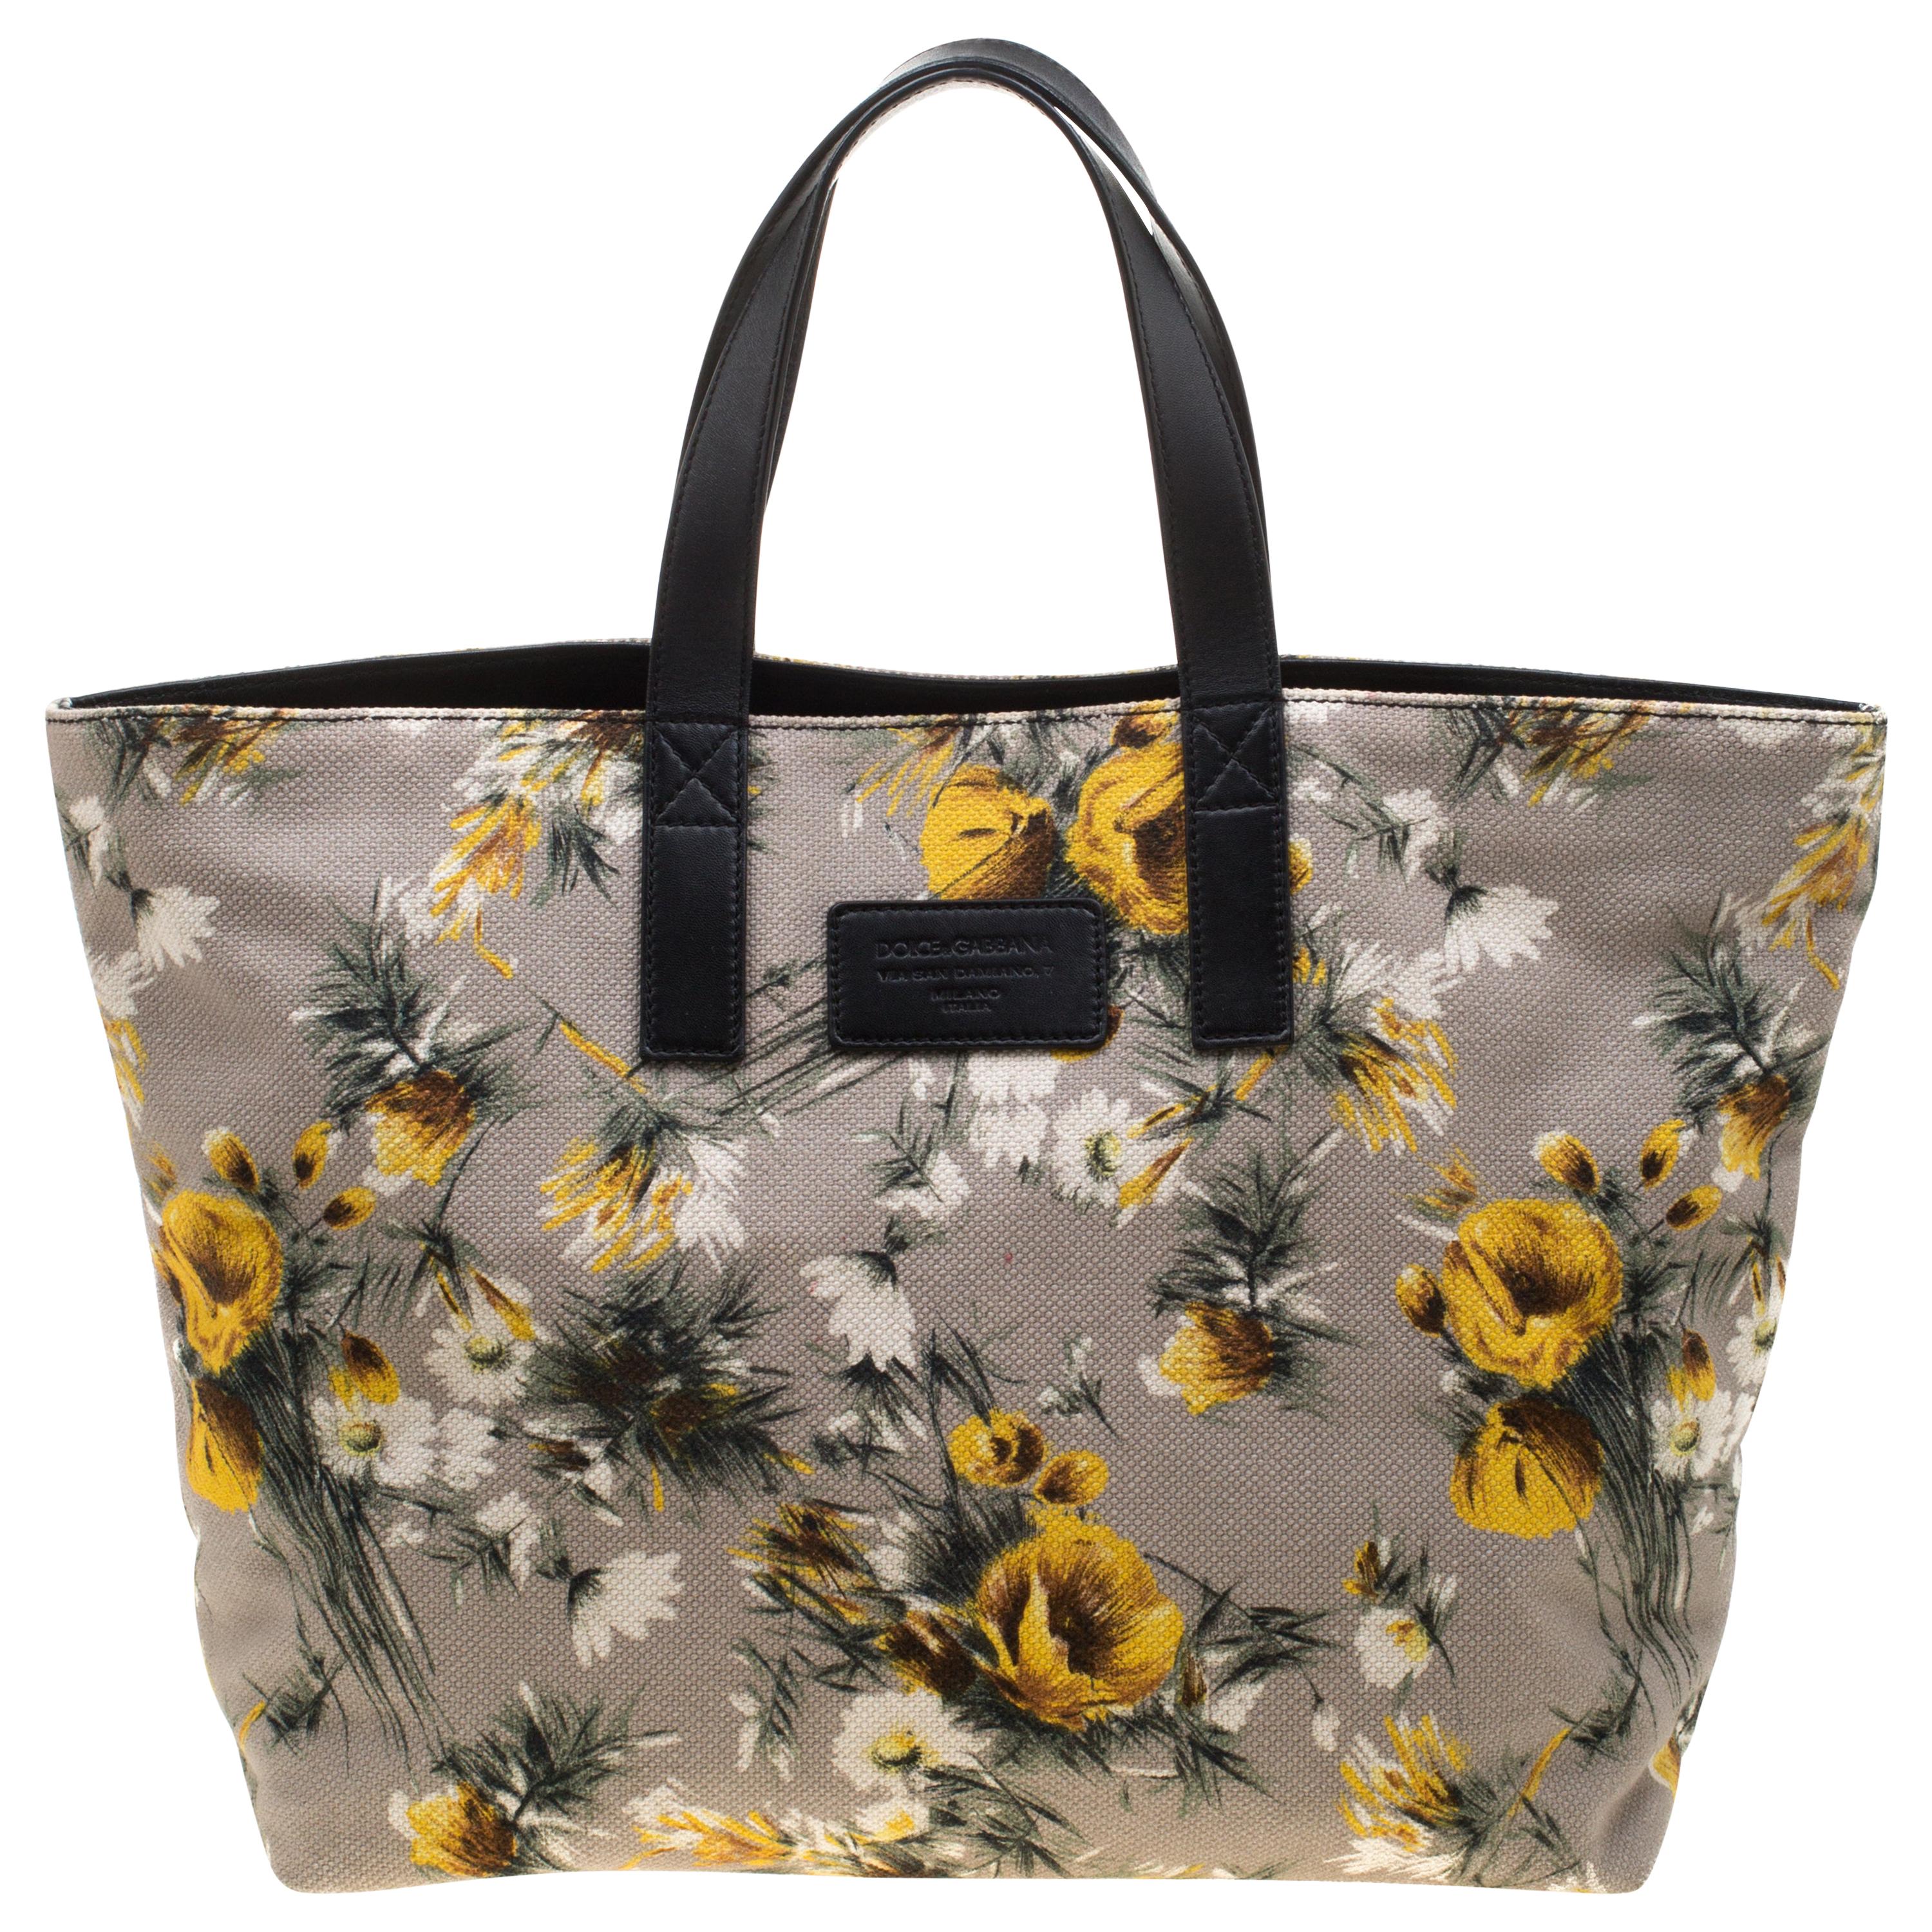 Dolce & Gabbana Floral Printed Canvas and Leather Tote